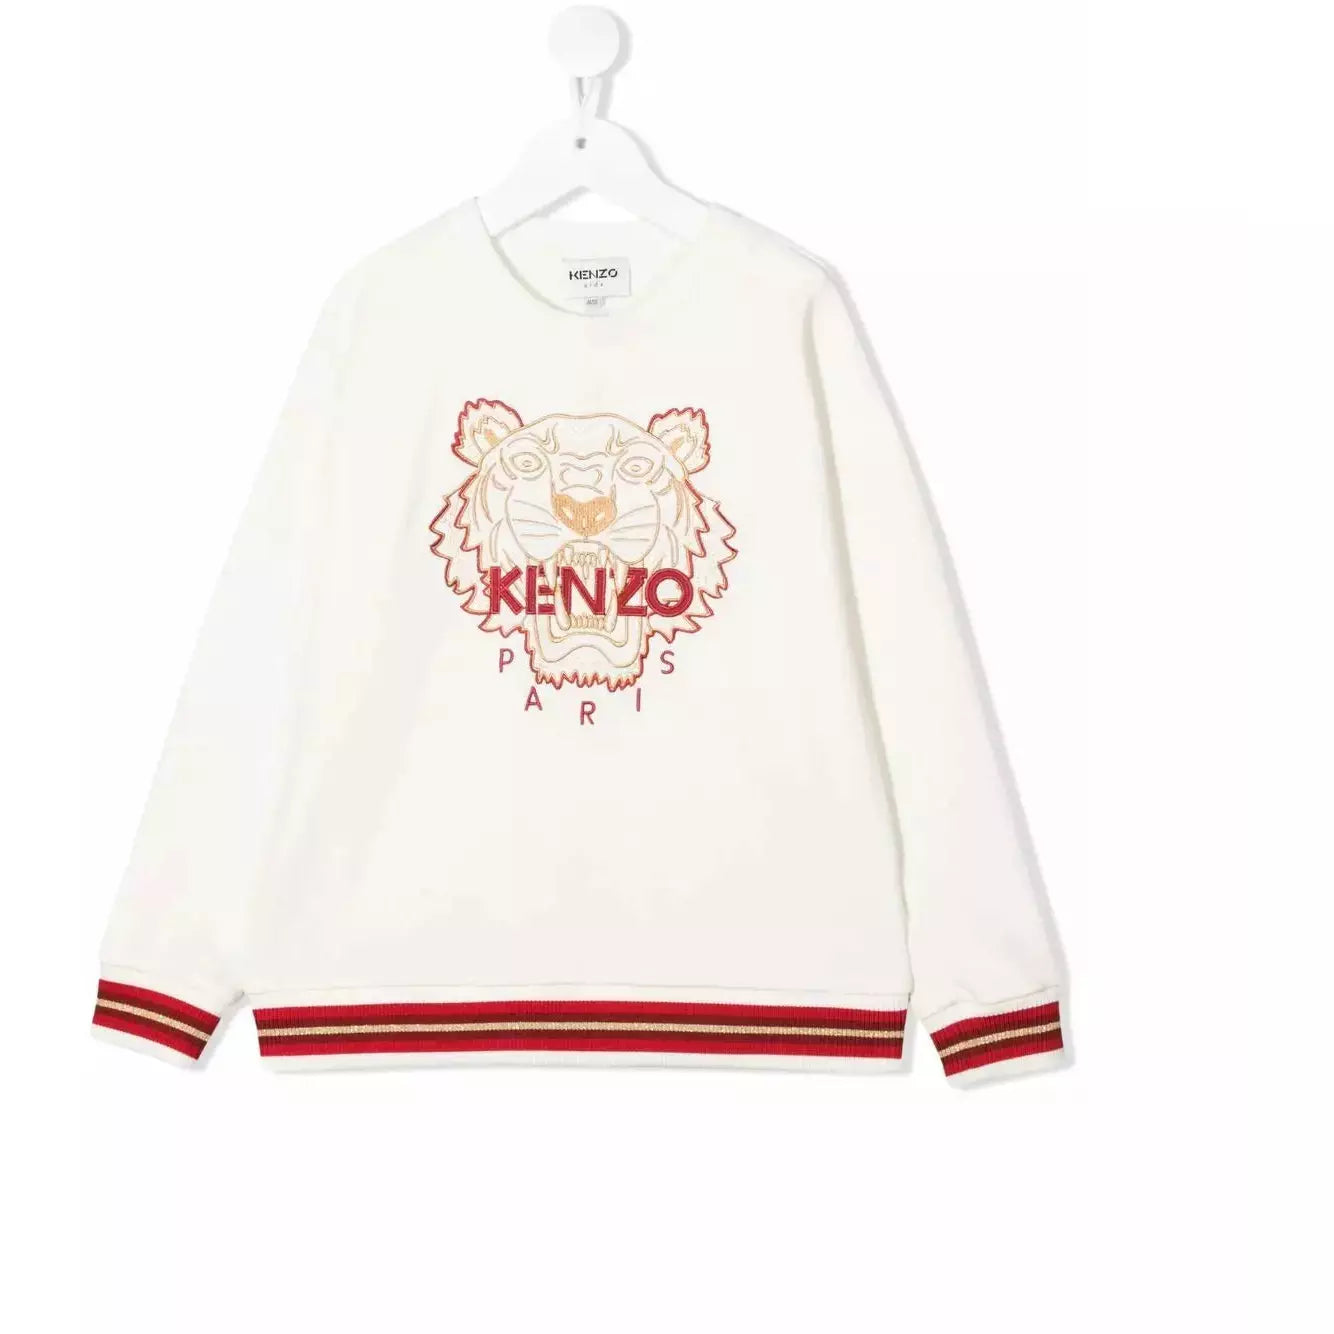 EMBRODERED LOGO SWEATER